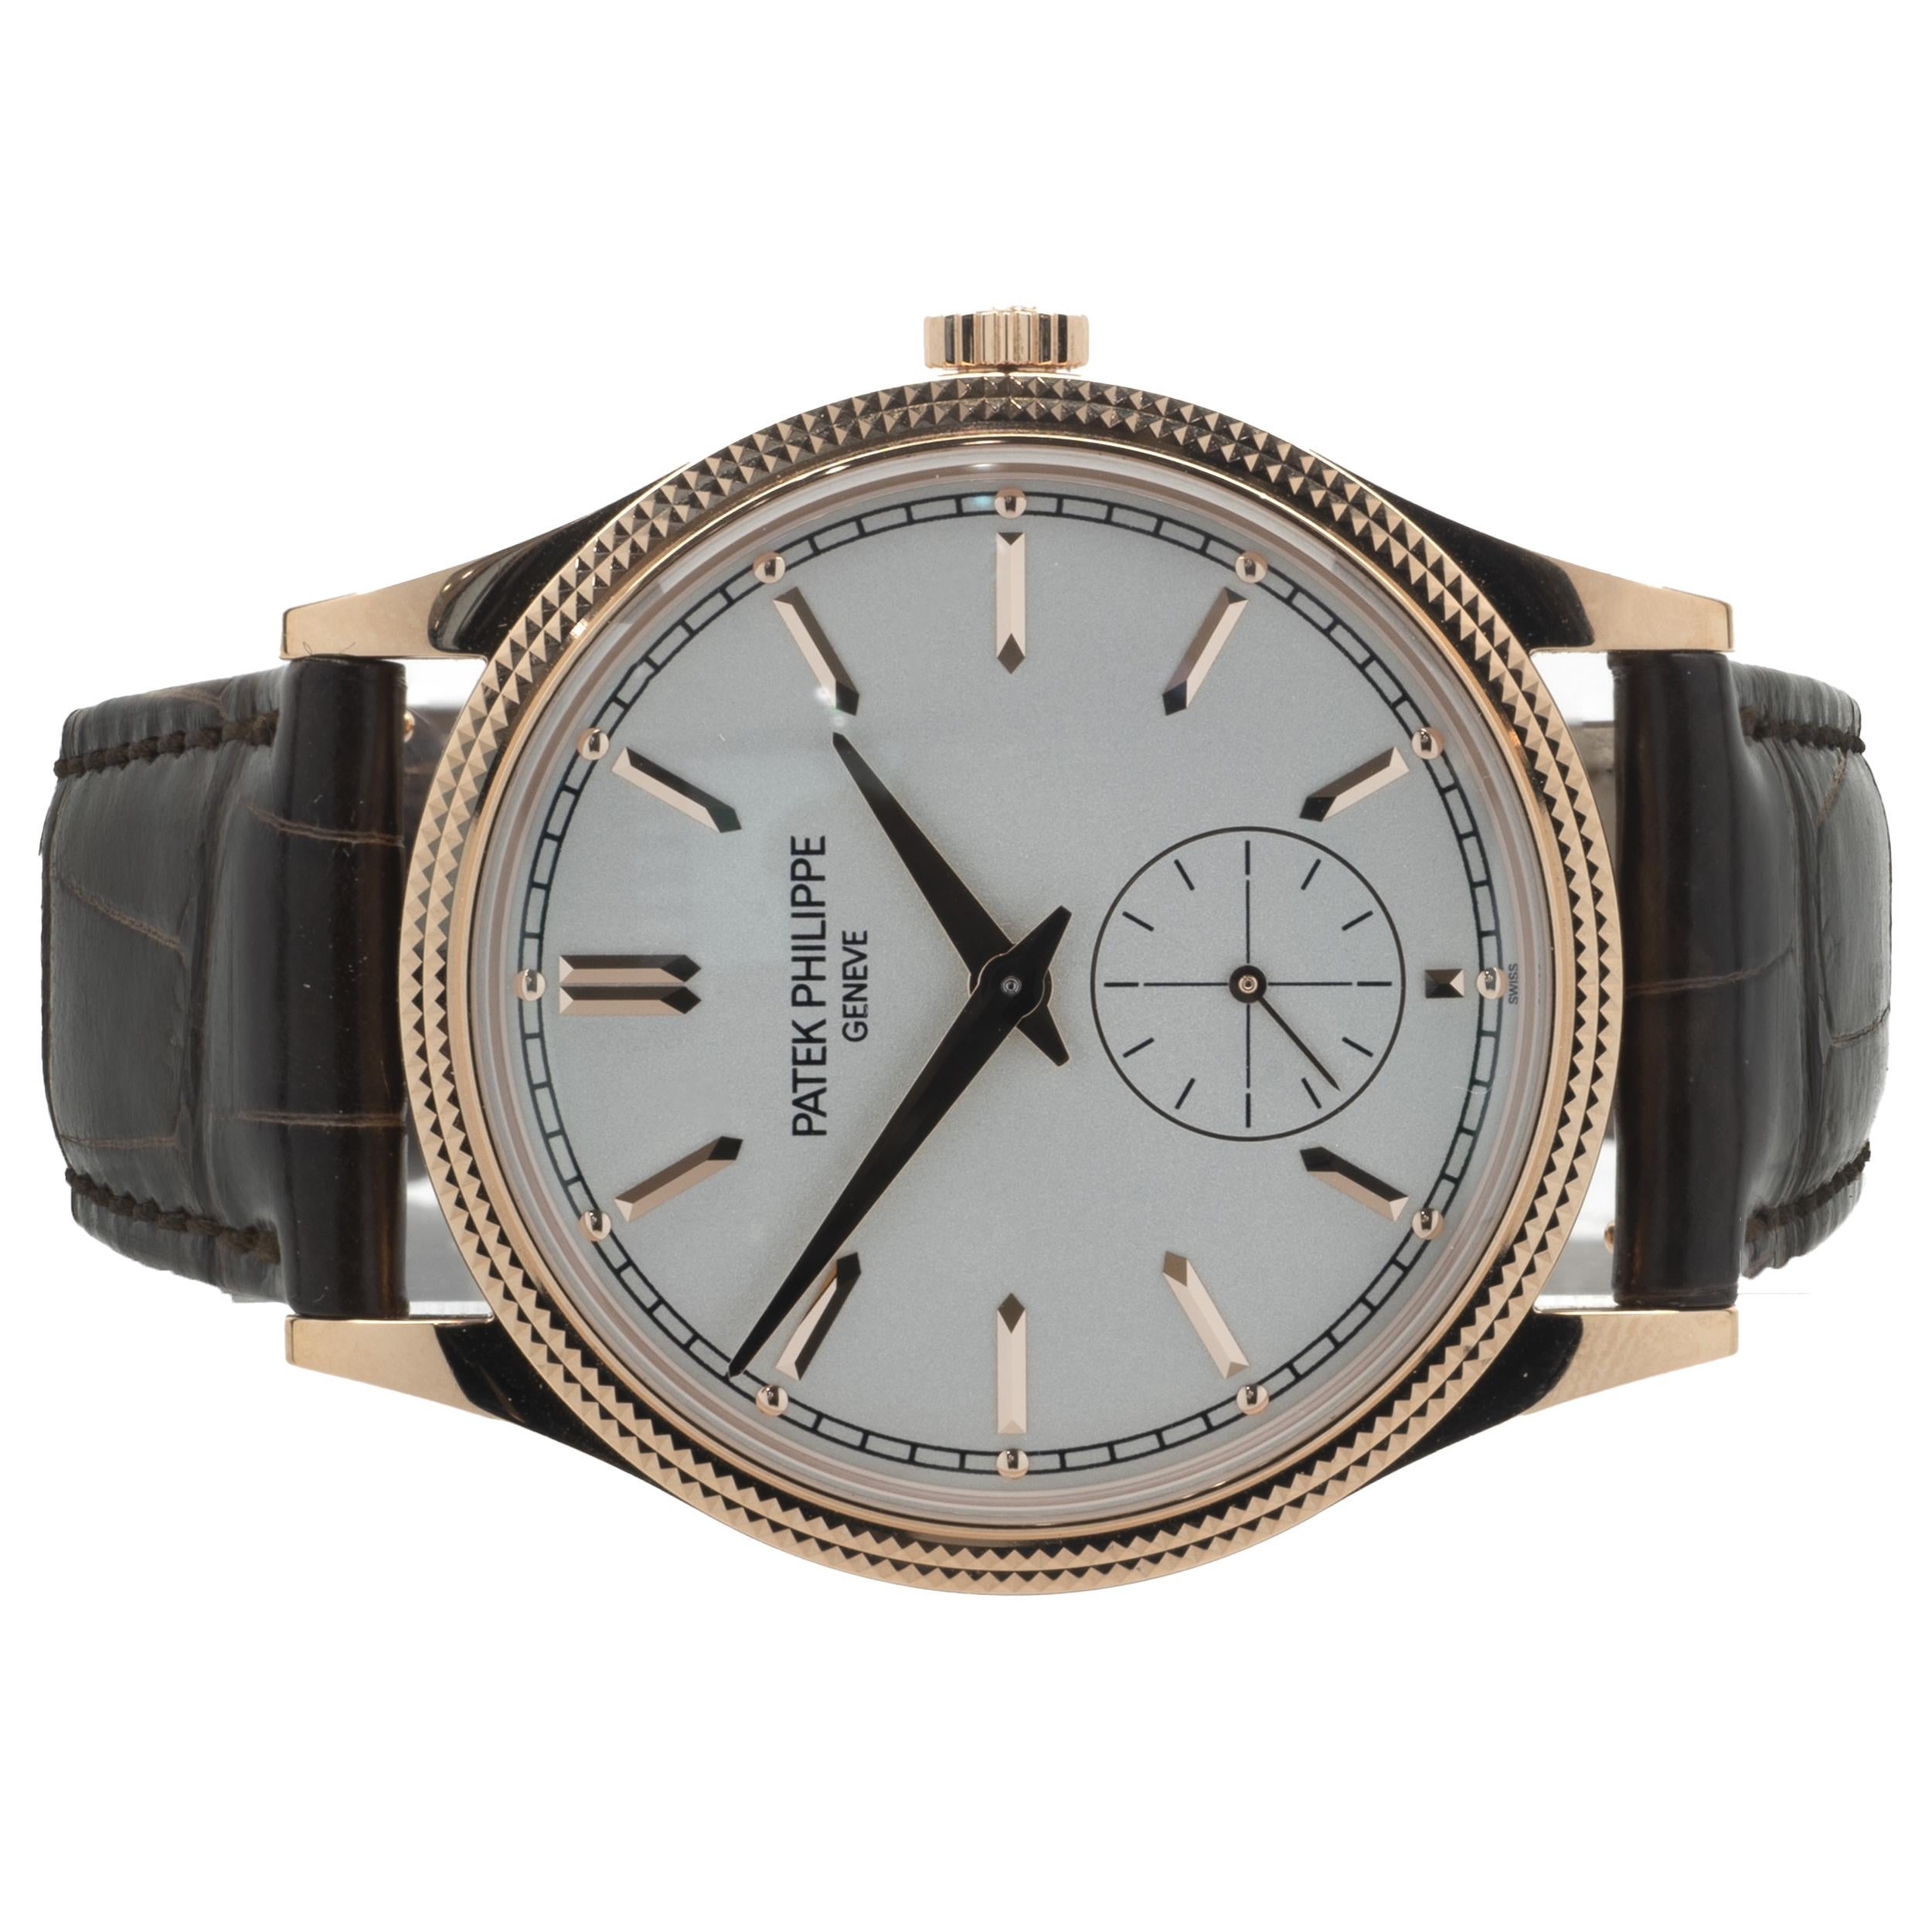 Movement: automatic
Function: hours, minutes
Case: 39mm 18K rose gold round case, sapphire crystal, hobnail pattern bezel
Dial: silver and rose stick dial
Band: brown Patek Philippe leather strap, 18K rose gold buckle
Reference #: 6119R
Serial #: